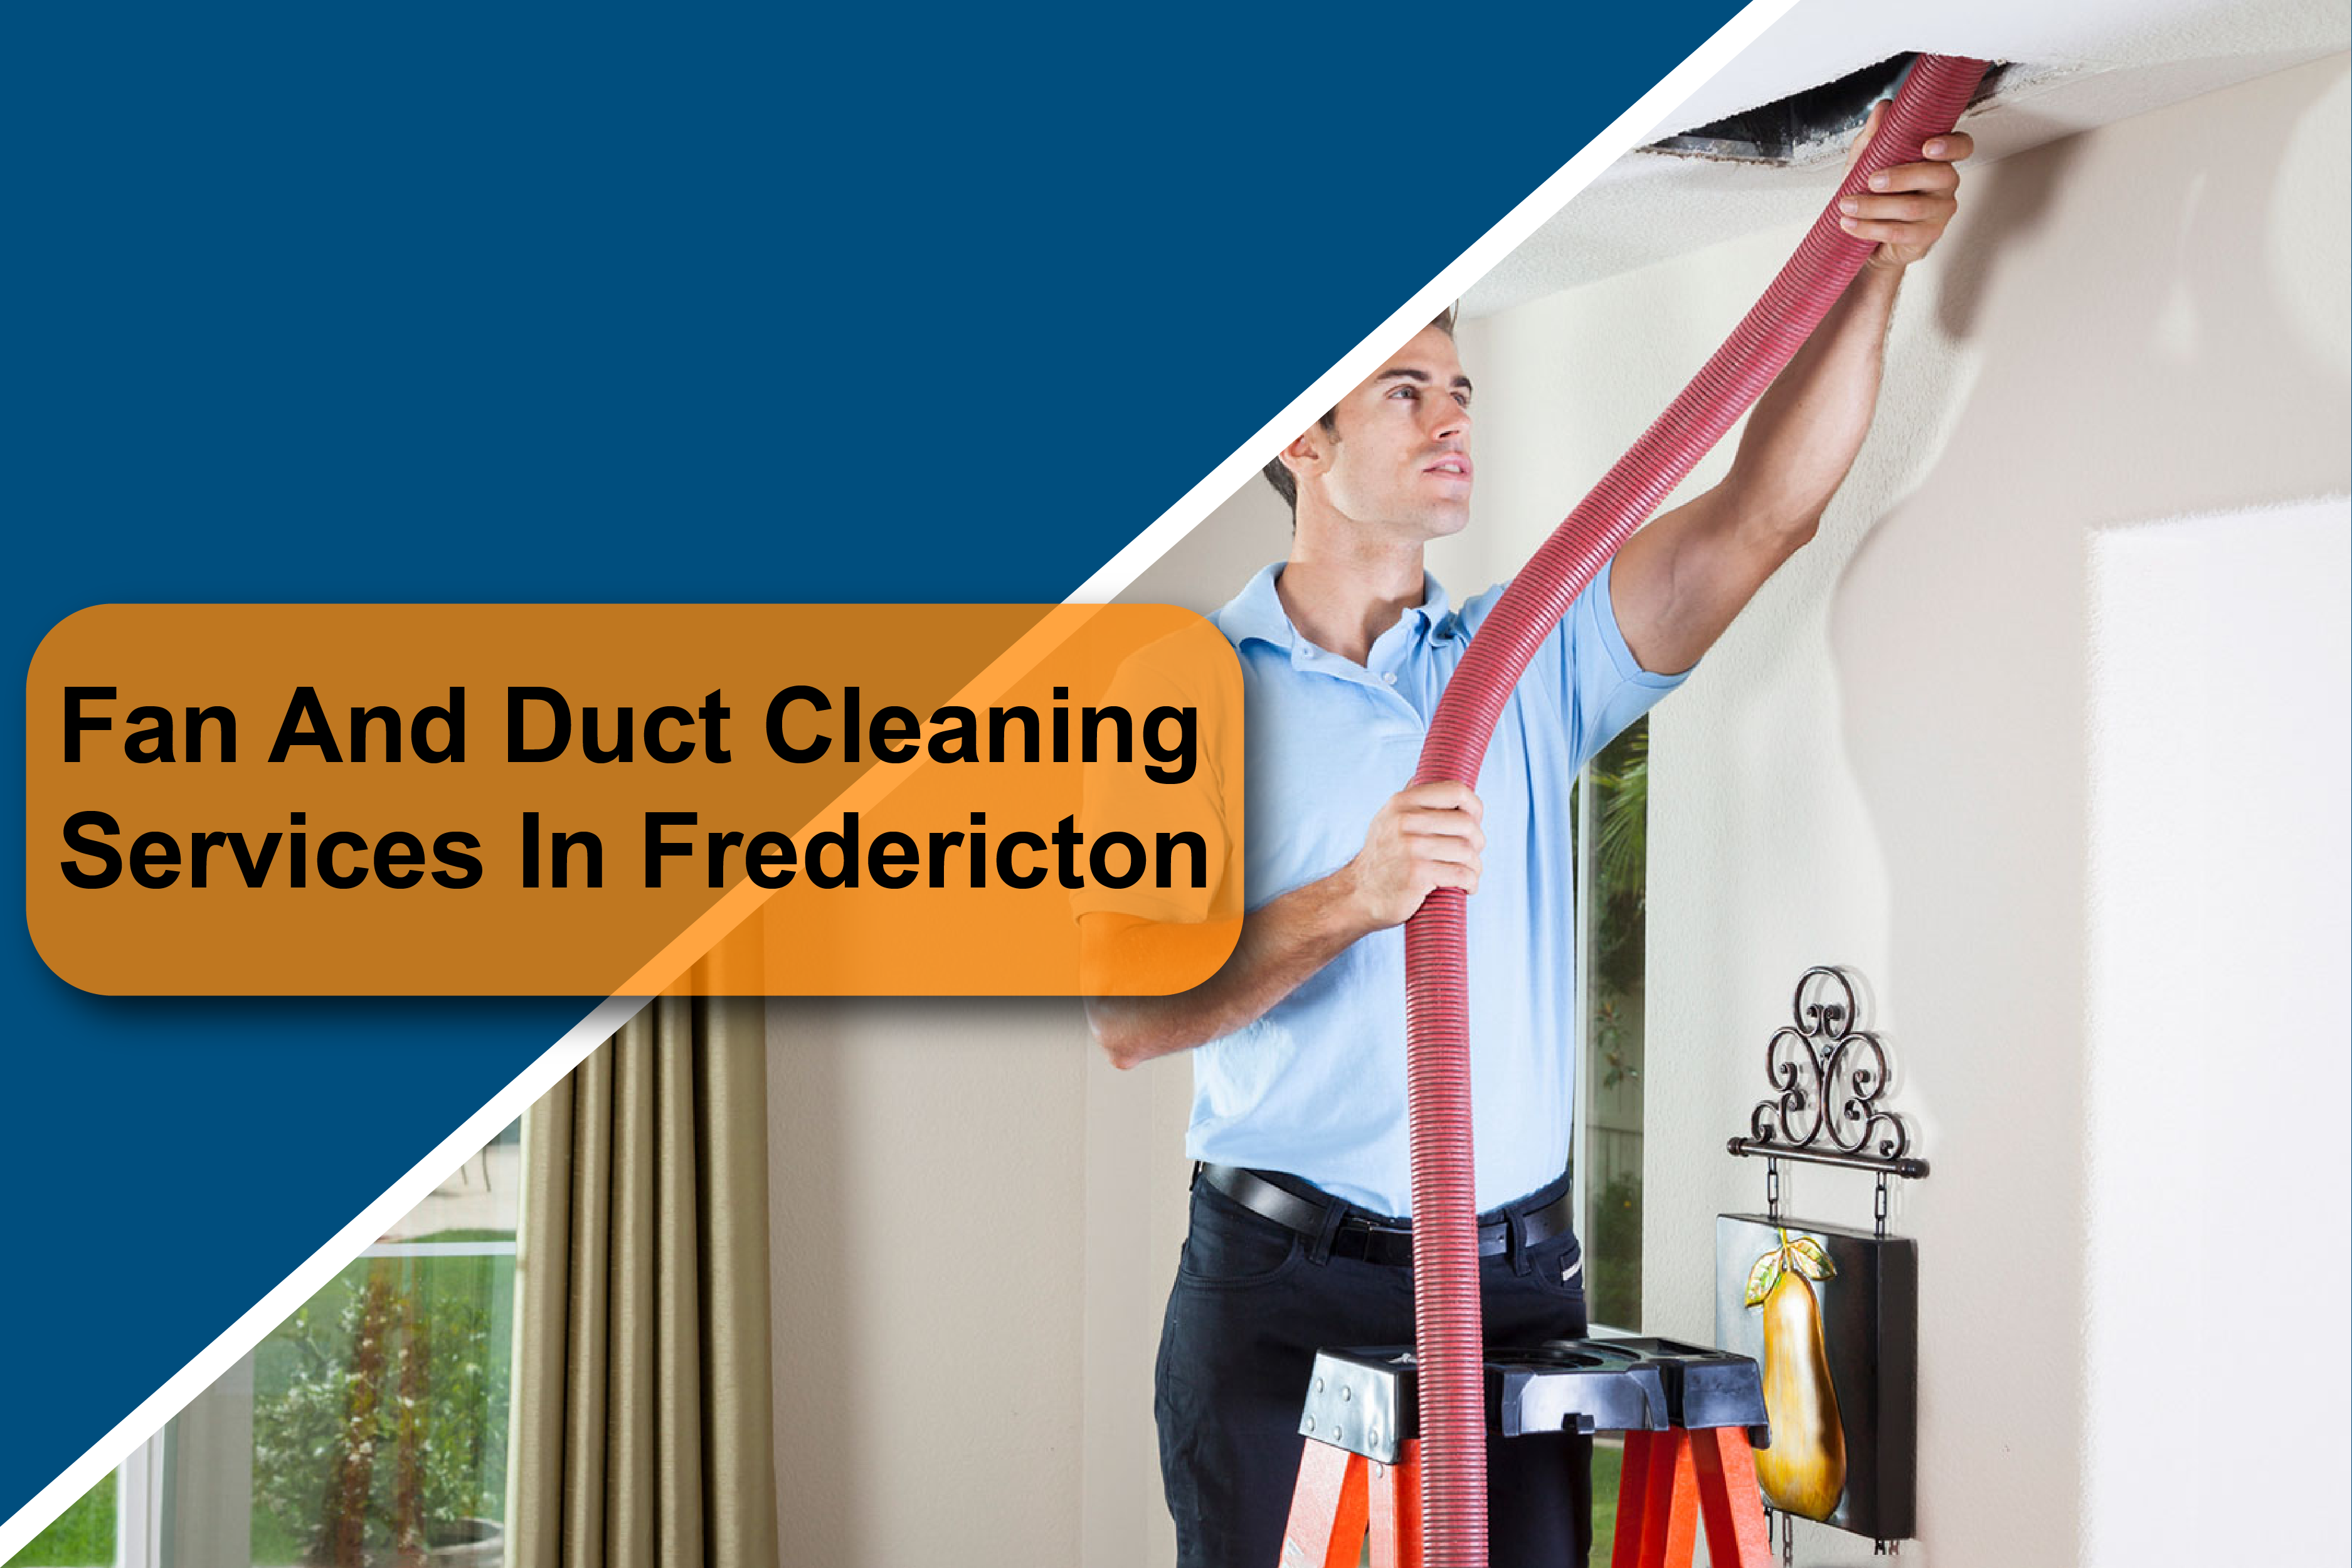 fan and duct cleaning services in Fredericton